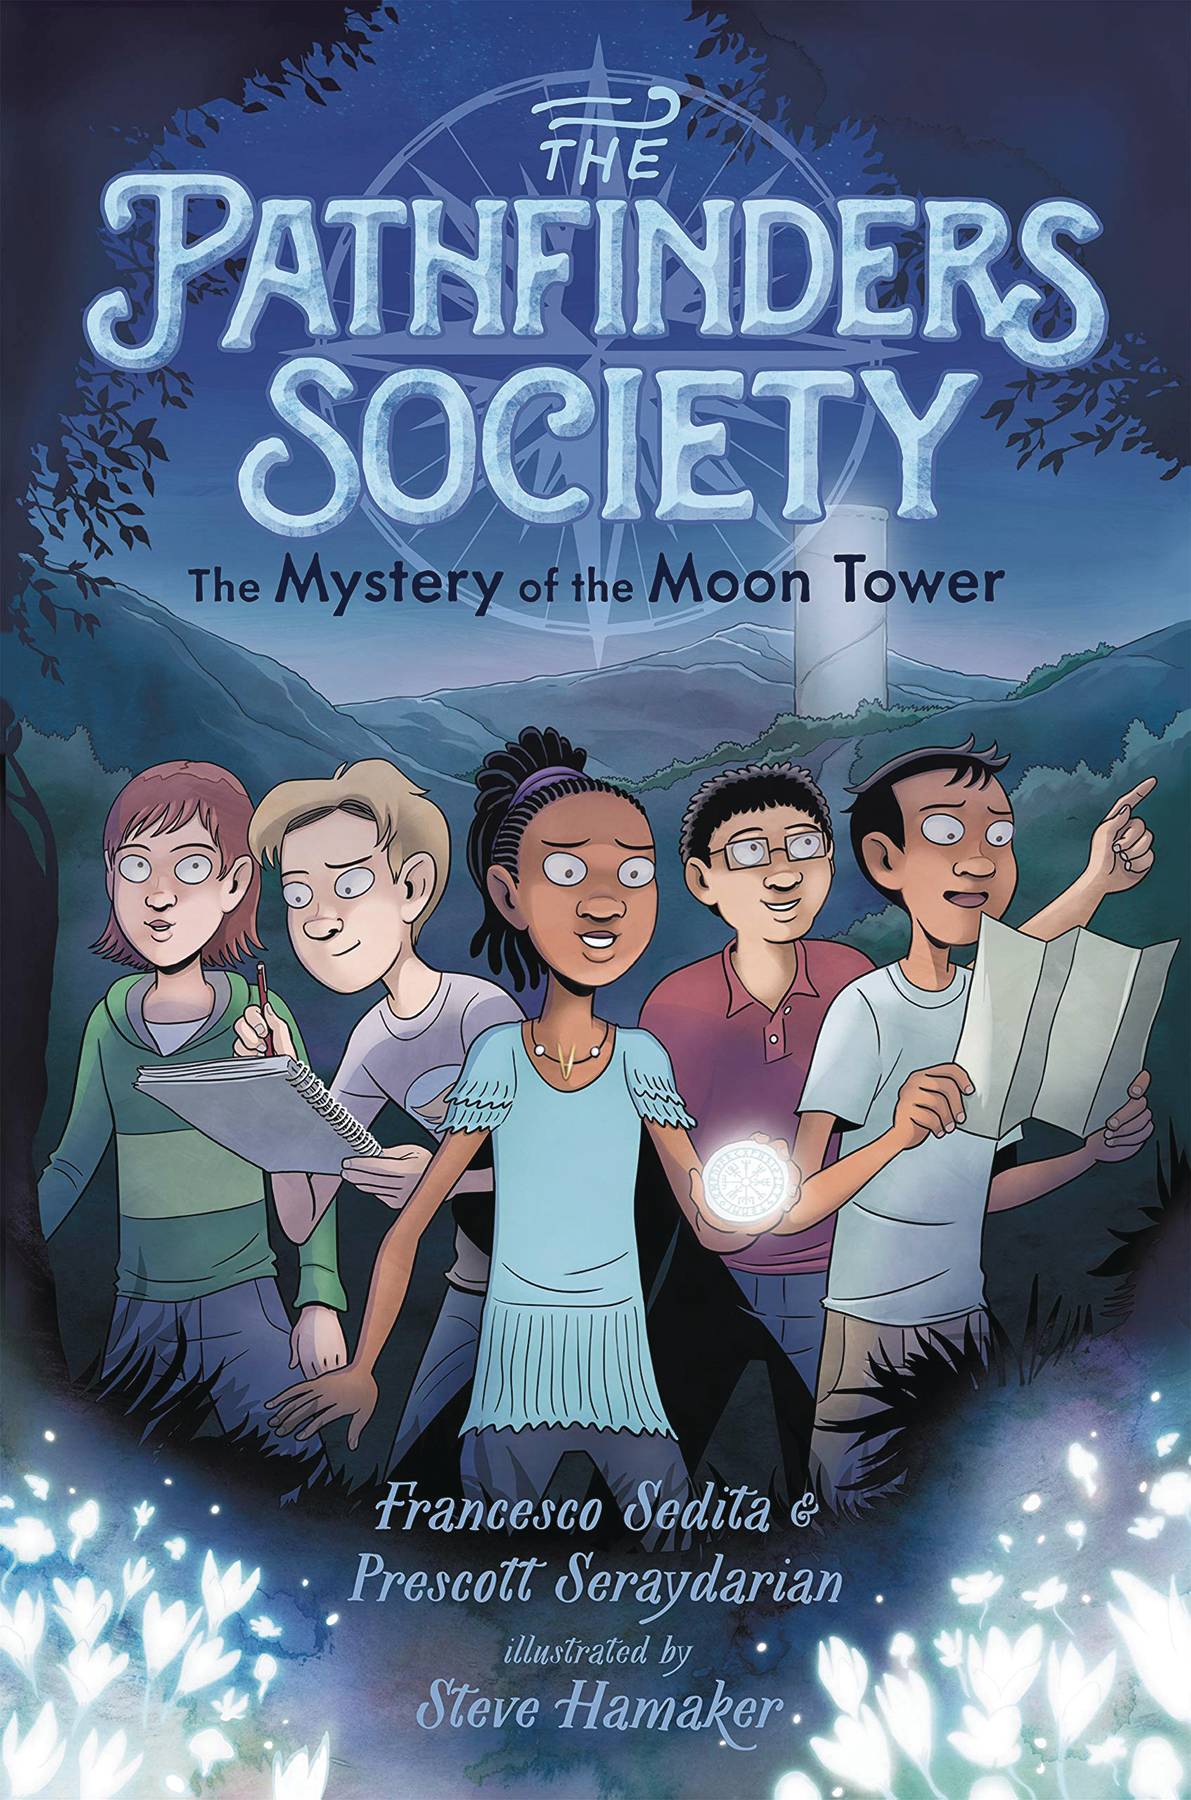 A group of teens stand in the forest, a faintly glowing tower in the distance behind them. A Black girl with cornrows in a ponytail leads the way, holding a glowing amulet. To her left are a girl with chinlength brown hair, and a blond boy sketching on a notepad. To the right are an Asian boy with glasses who is pointing off frame, and a tan-skinned boy holding a map. The group are framed by trees, and glowing flowers are just visible in frame.